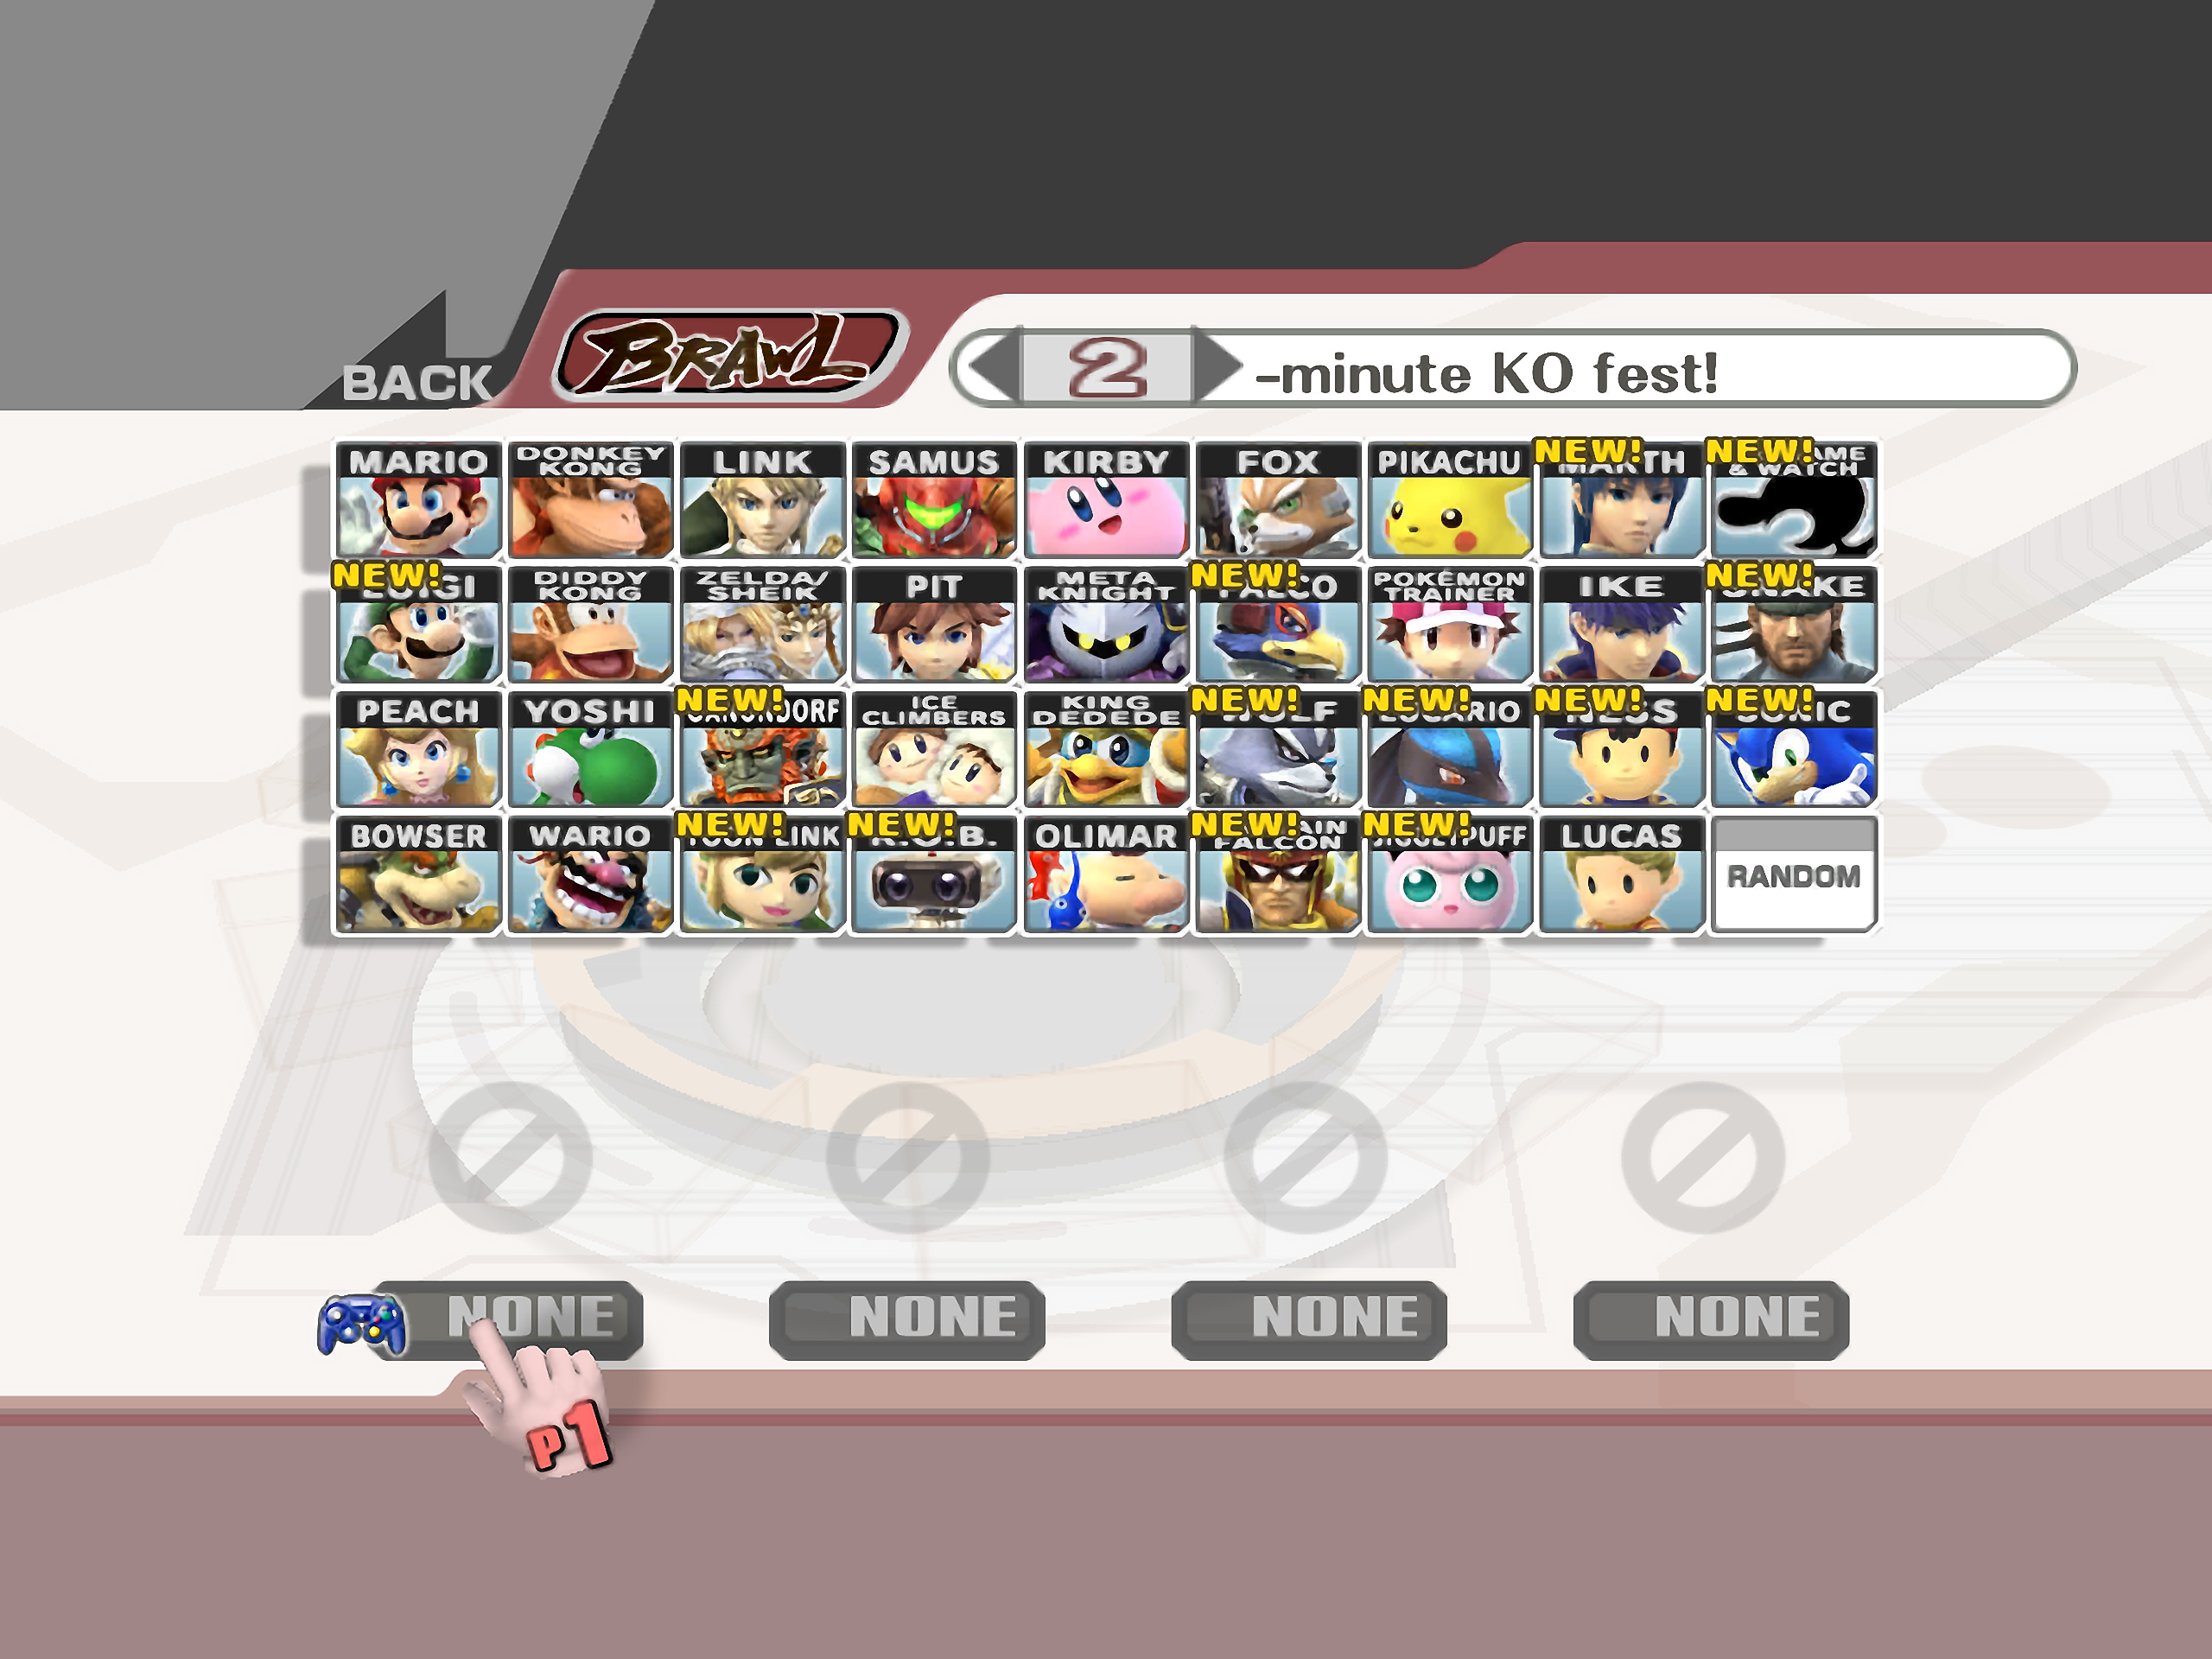 http://static2.wikia.nocookie.net/__cb20131124044705/ssb/images/9/93/Character_Selection_-_Super_Smash_Bros._Brawl.png